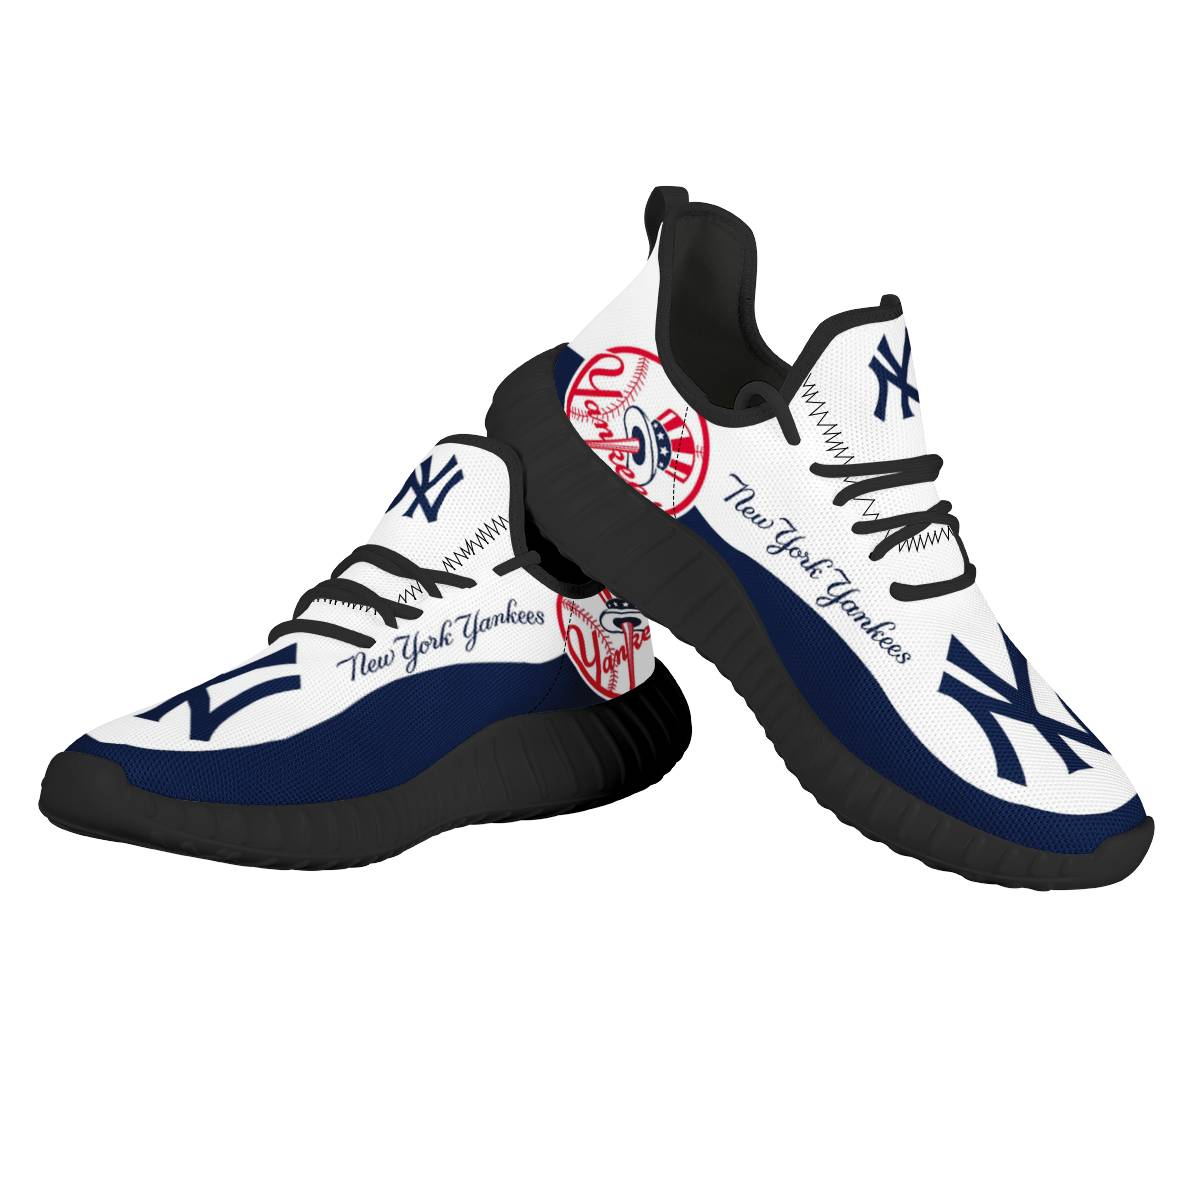 Women's New York Yankees Mesh Knit Sneakers/Shoes 002